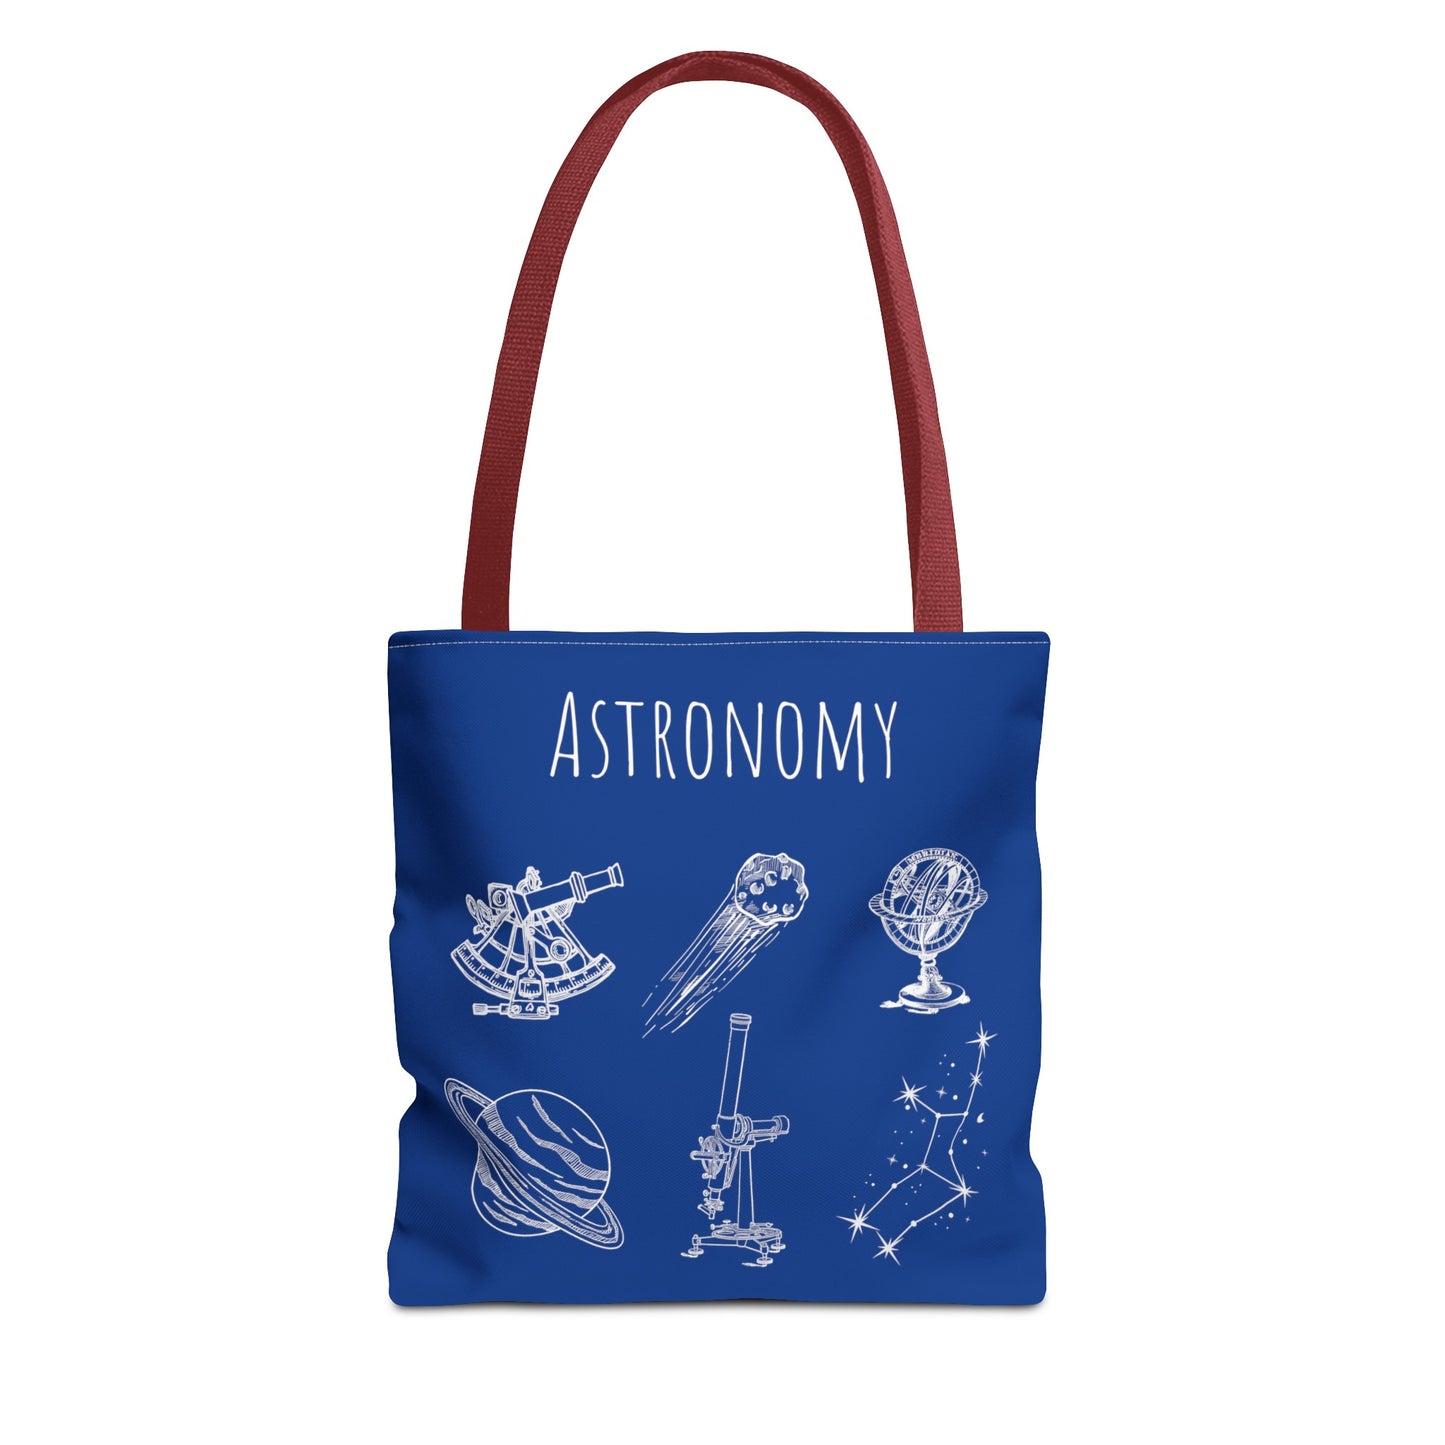 Astronomy Tote Bag (Magical Studies Collection)